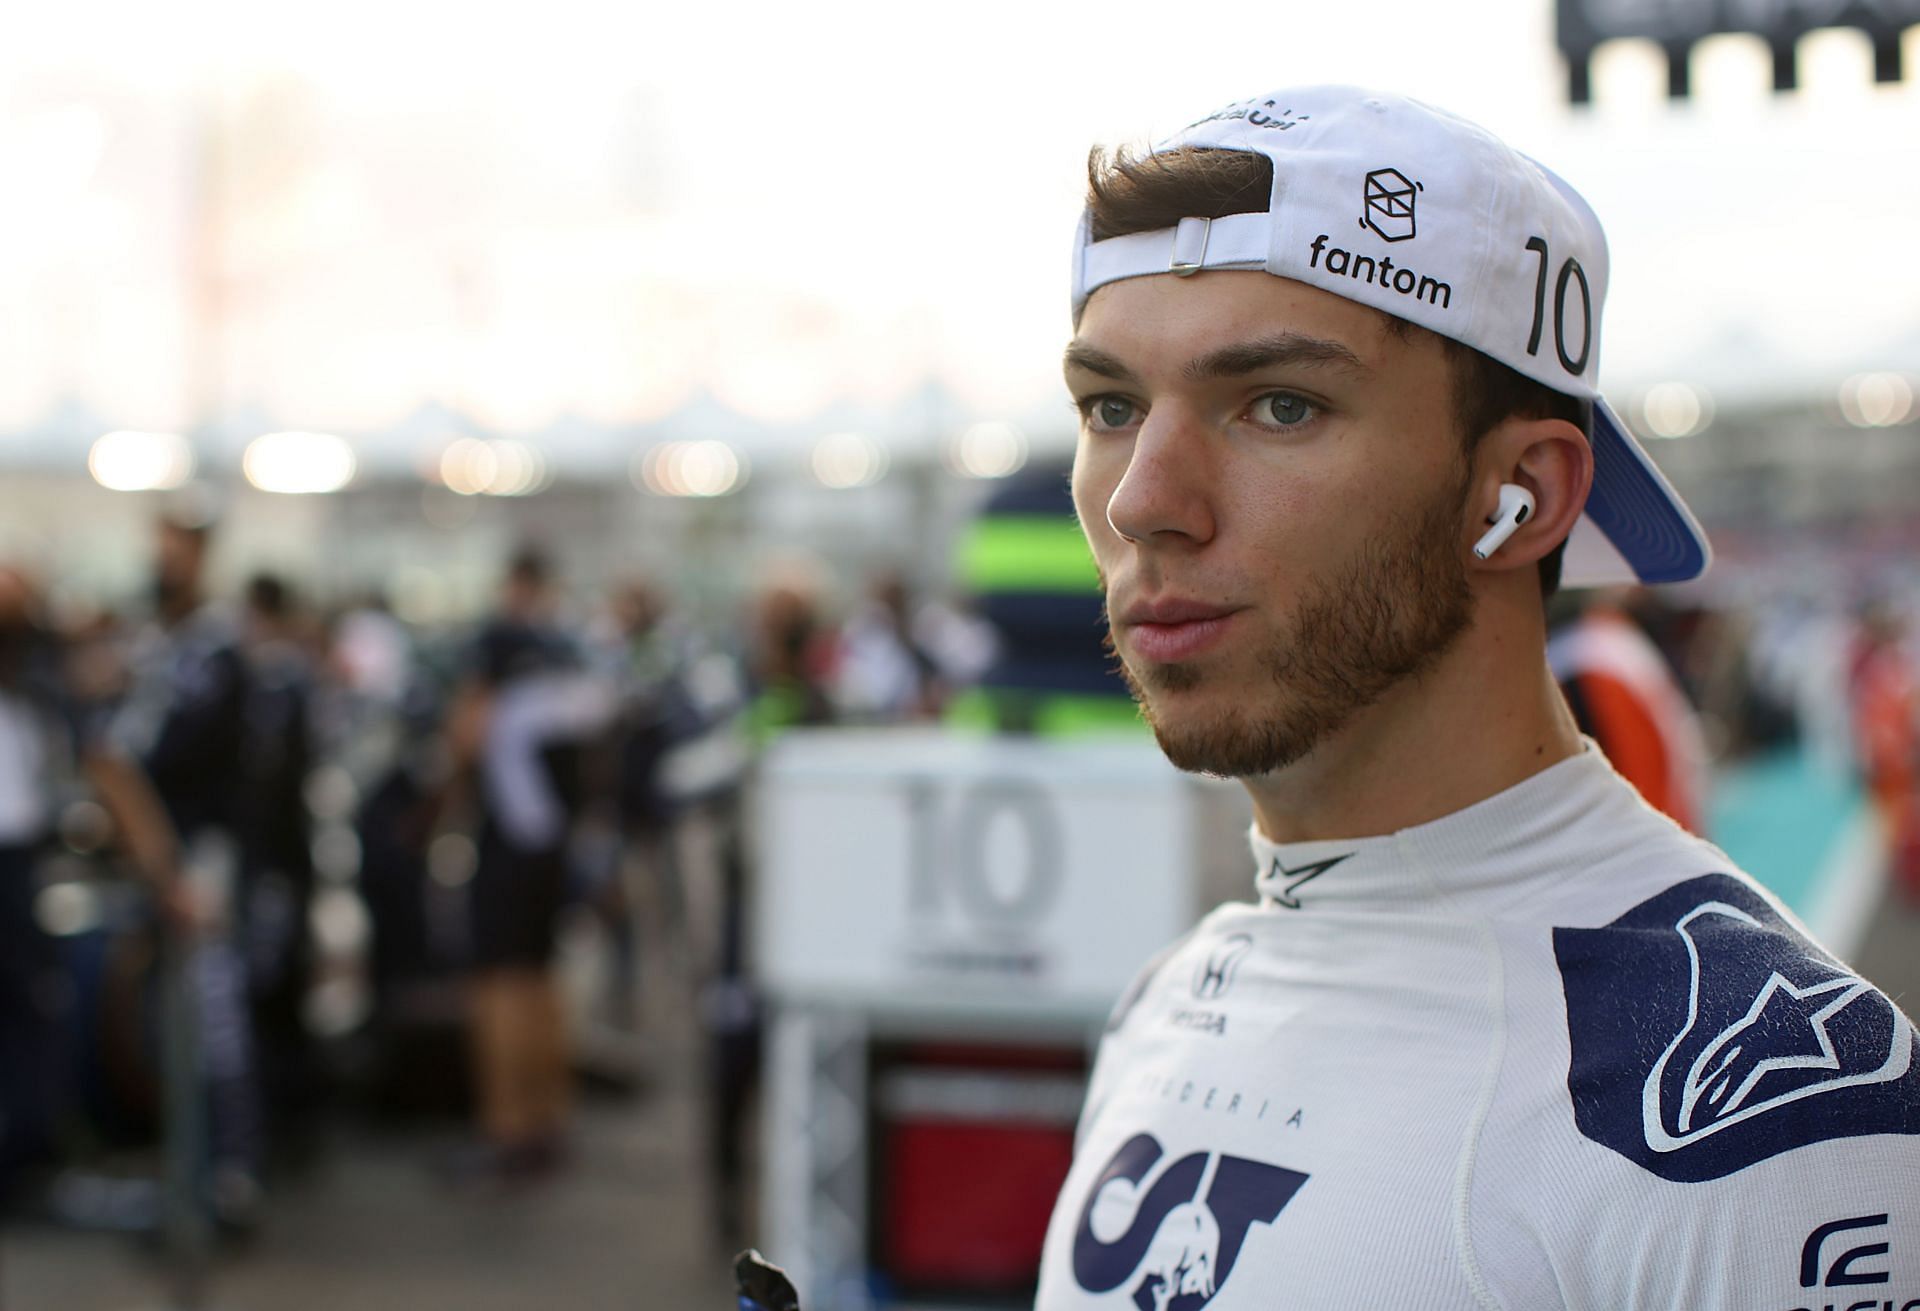 Pierre Gasly stood P9 in the 2021 Drivers Championship battle